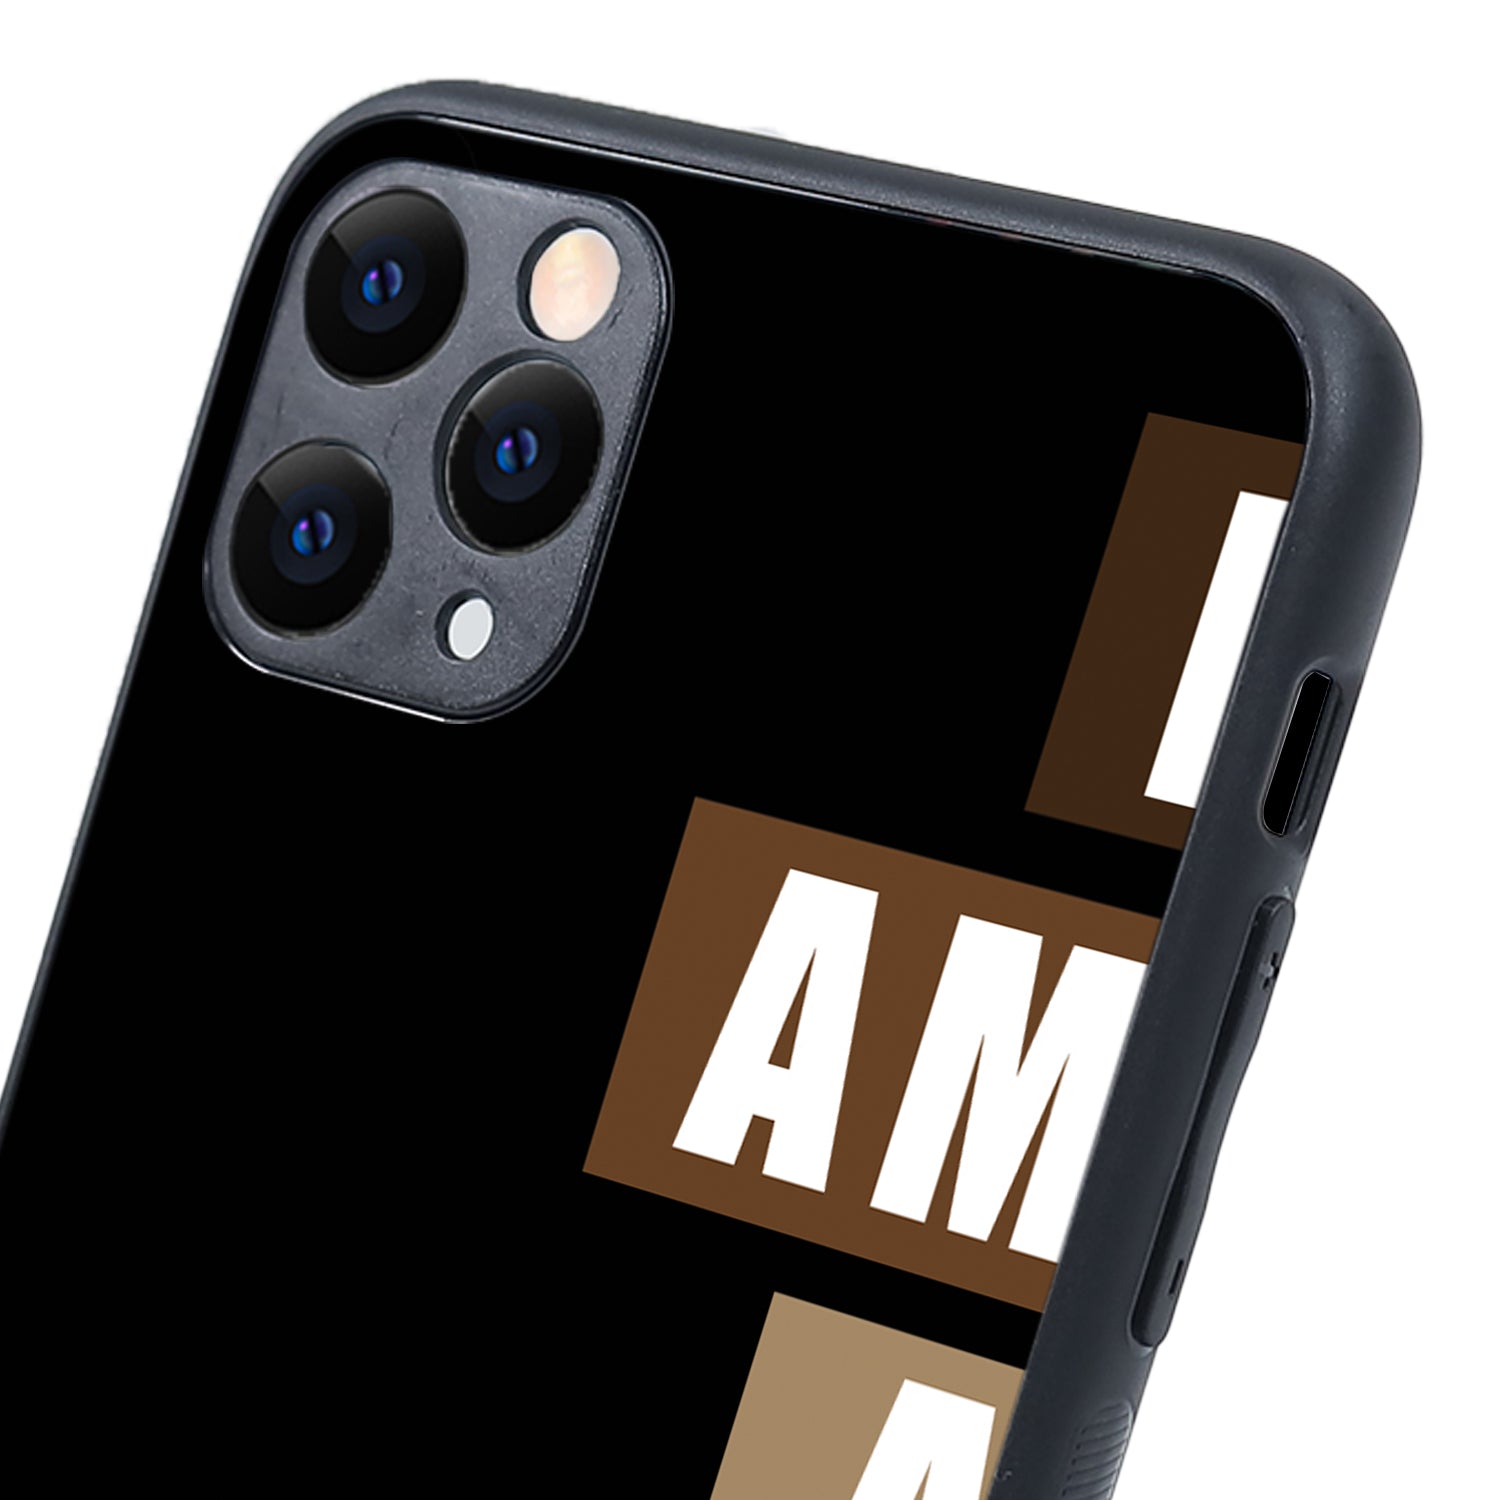 I Am A Man Of Words Motivational Quotes iPhone 11 Pro Max Case